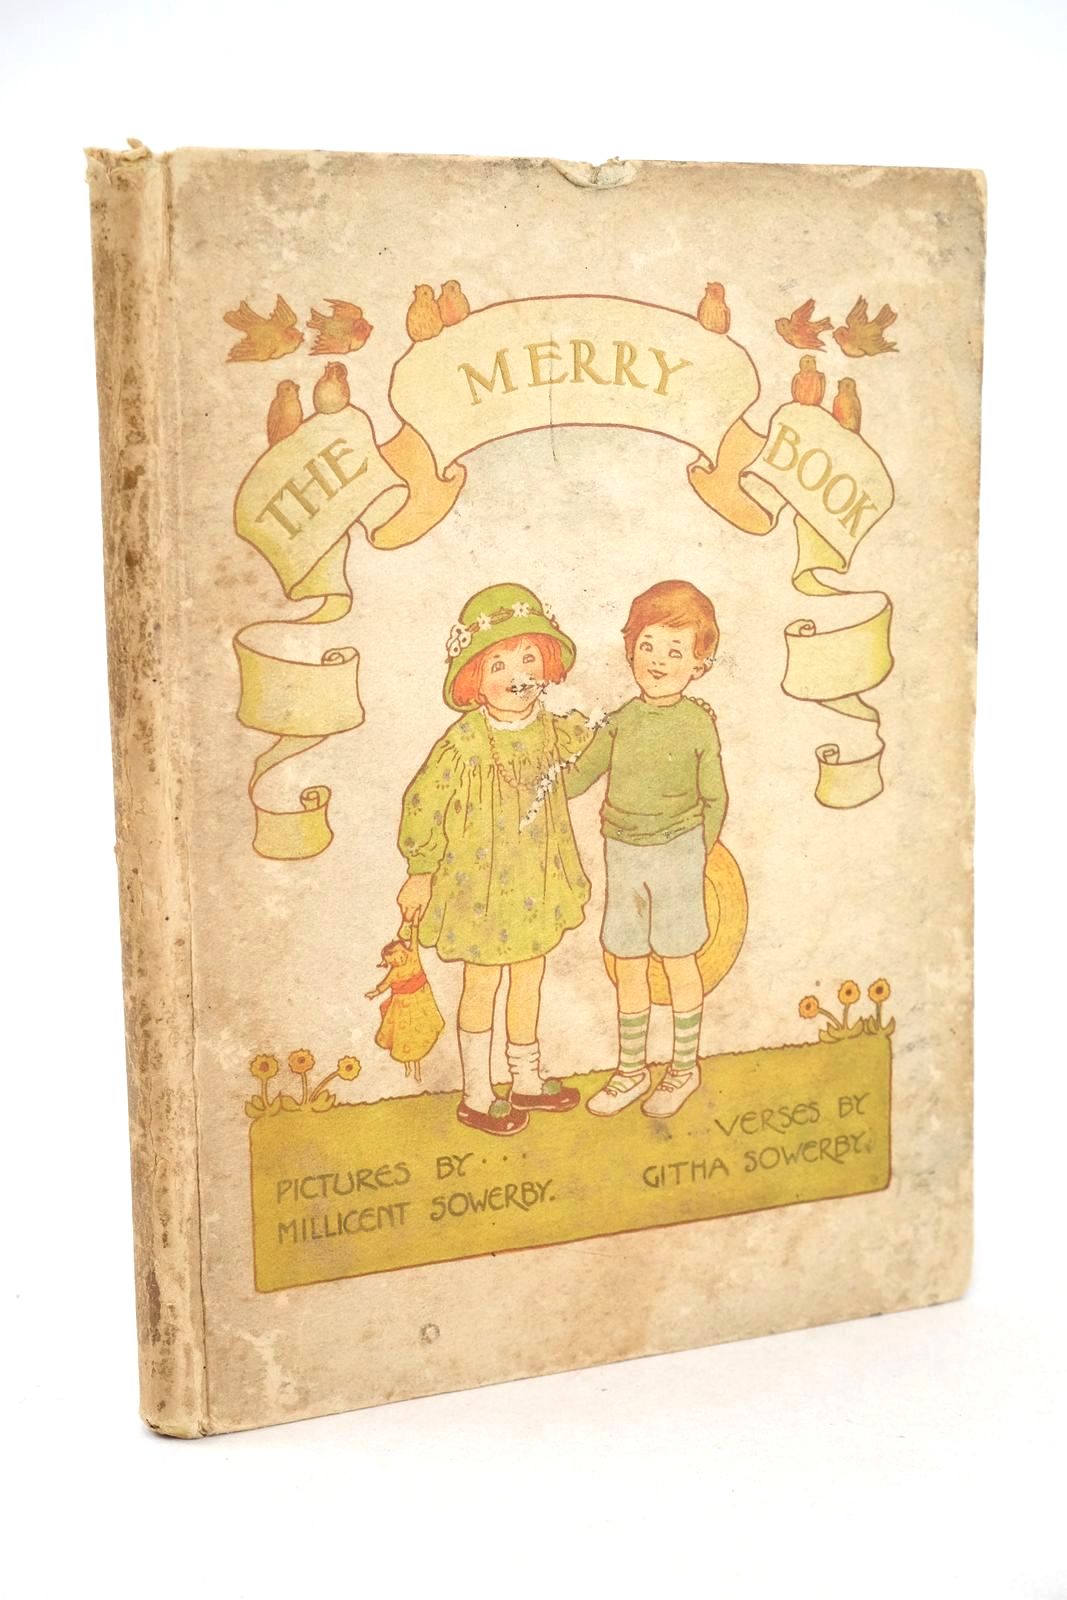 Photo of THE MERRY BOOK written by Sowerby, Githa illustrated by Sowerby, Millicent published by Oxford University Press (STOCK CODE: 1325917)  for sale by Stella & Rose's Books